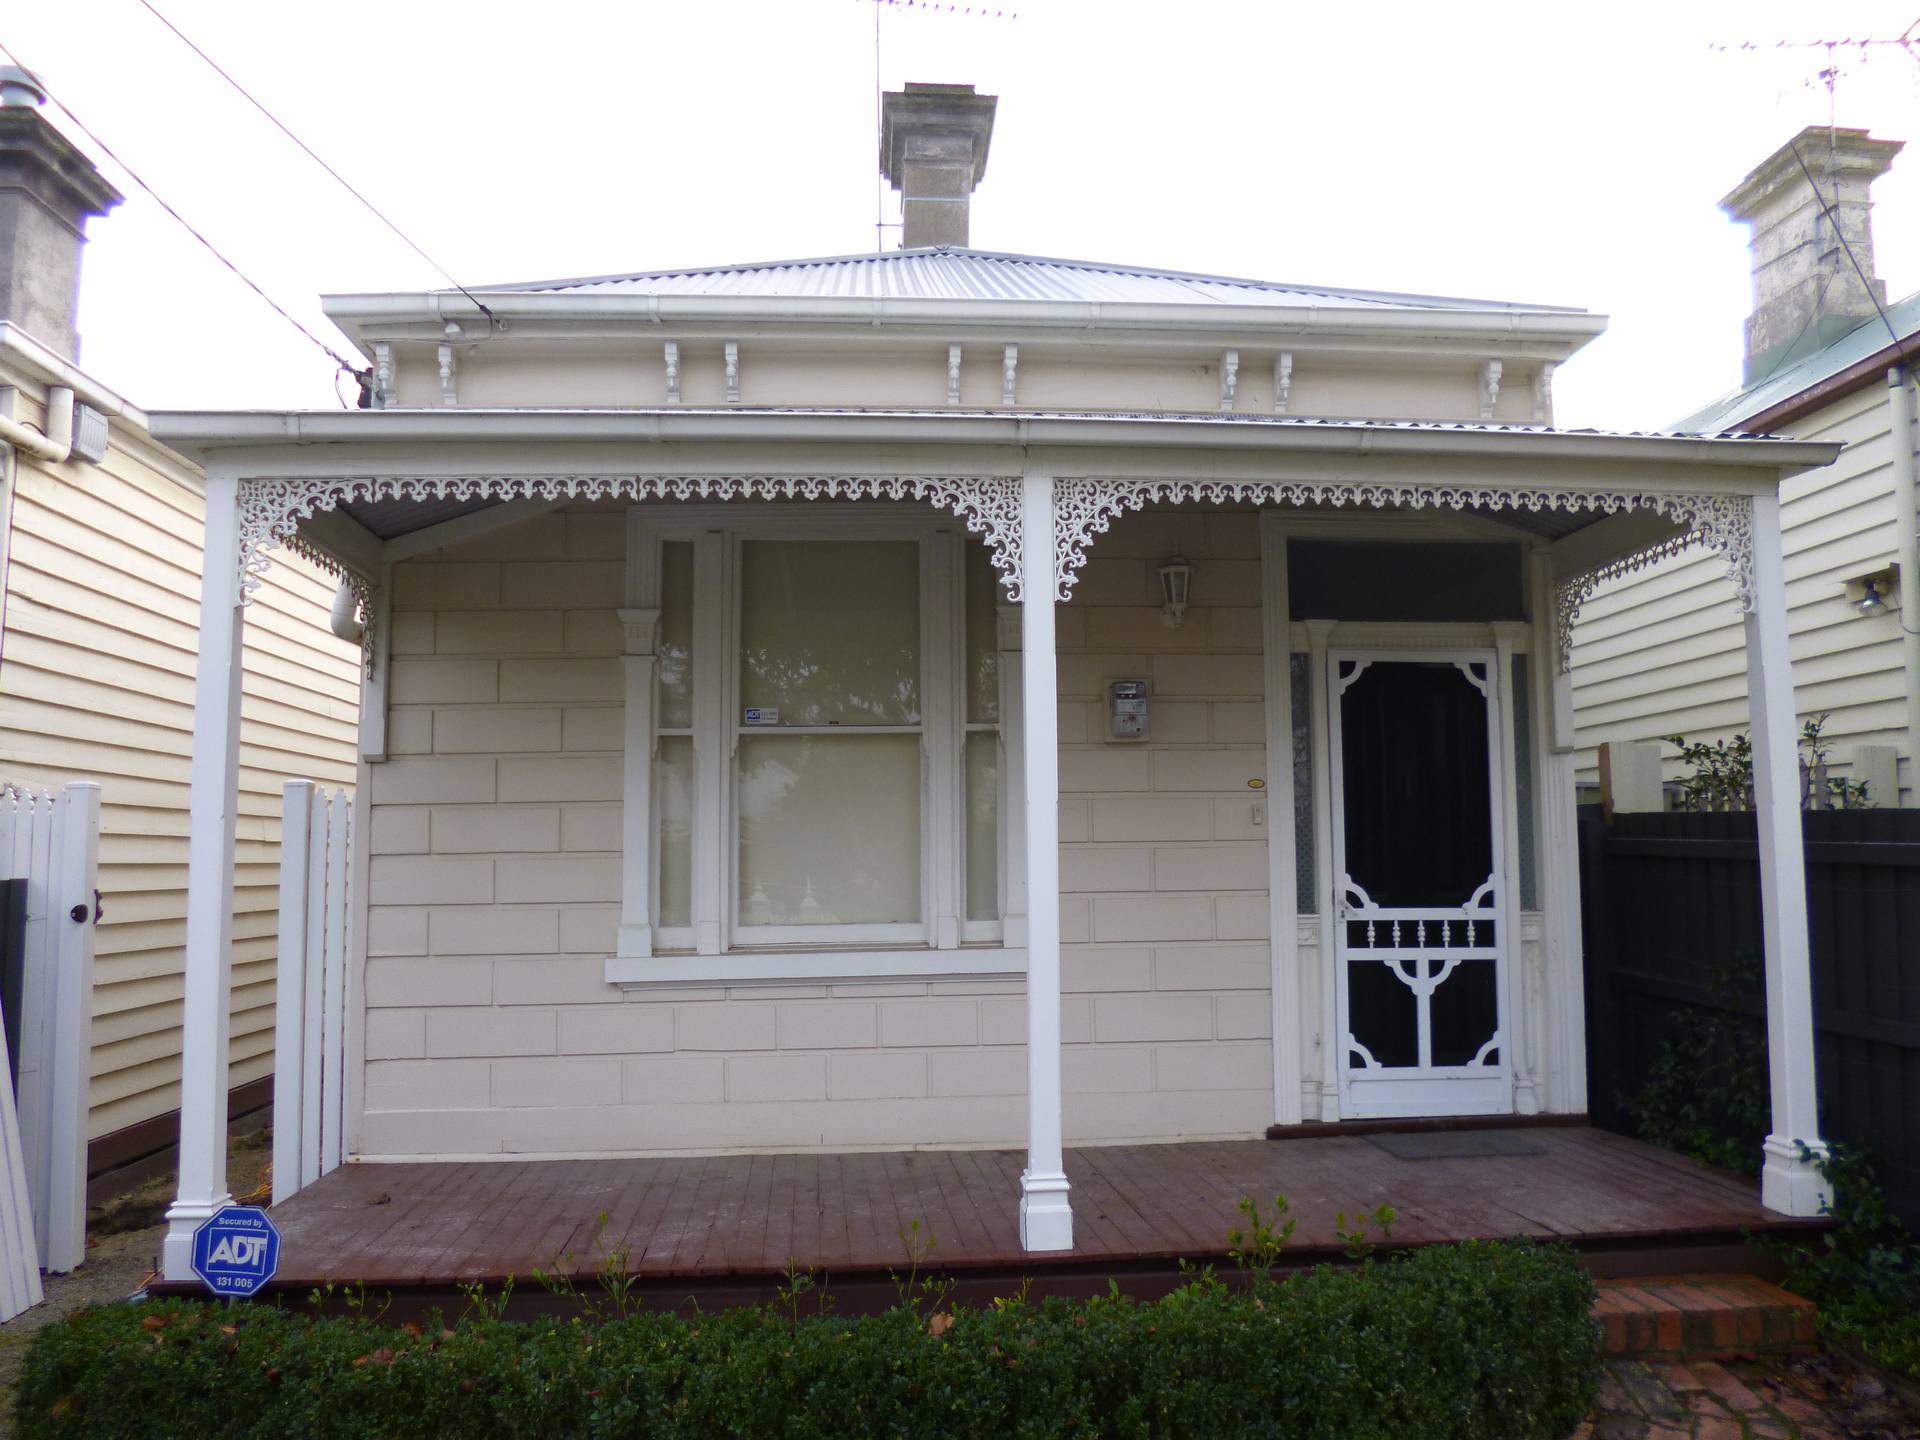 Before photo of the block weatherboard front Victorian period home in Hawthorn East